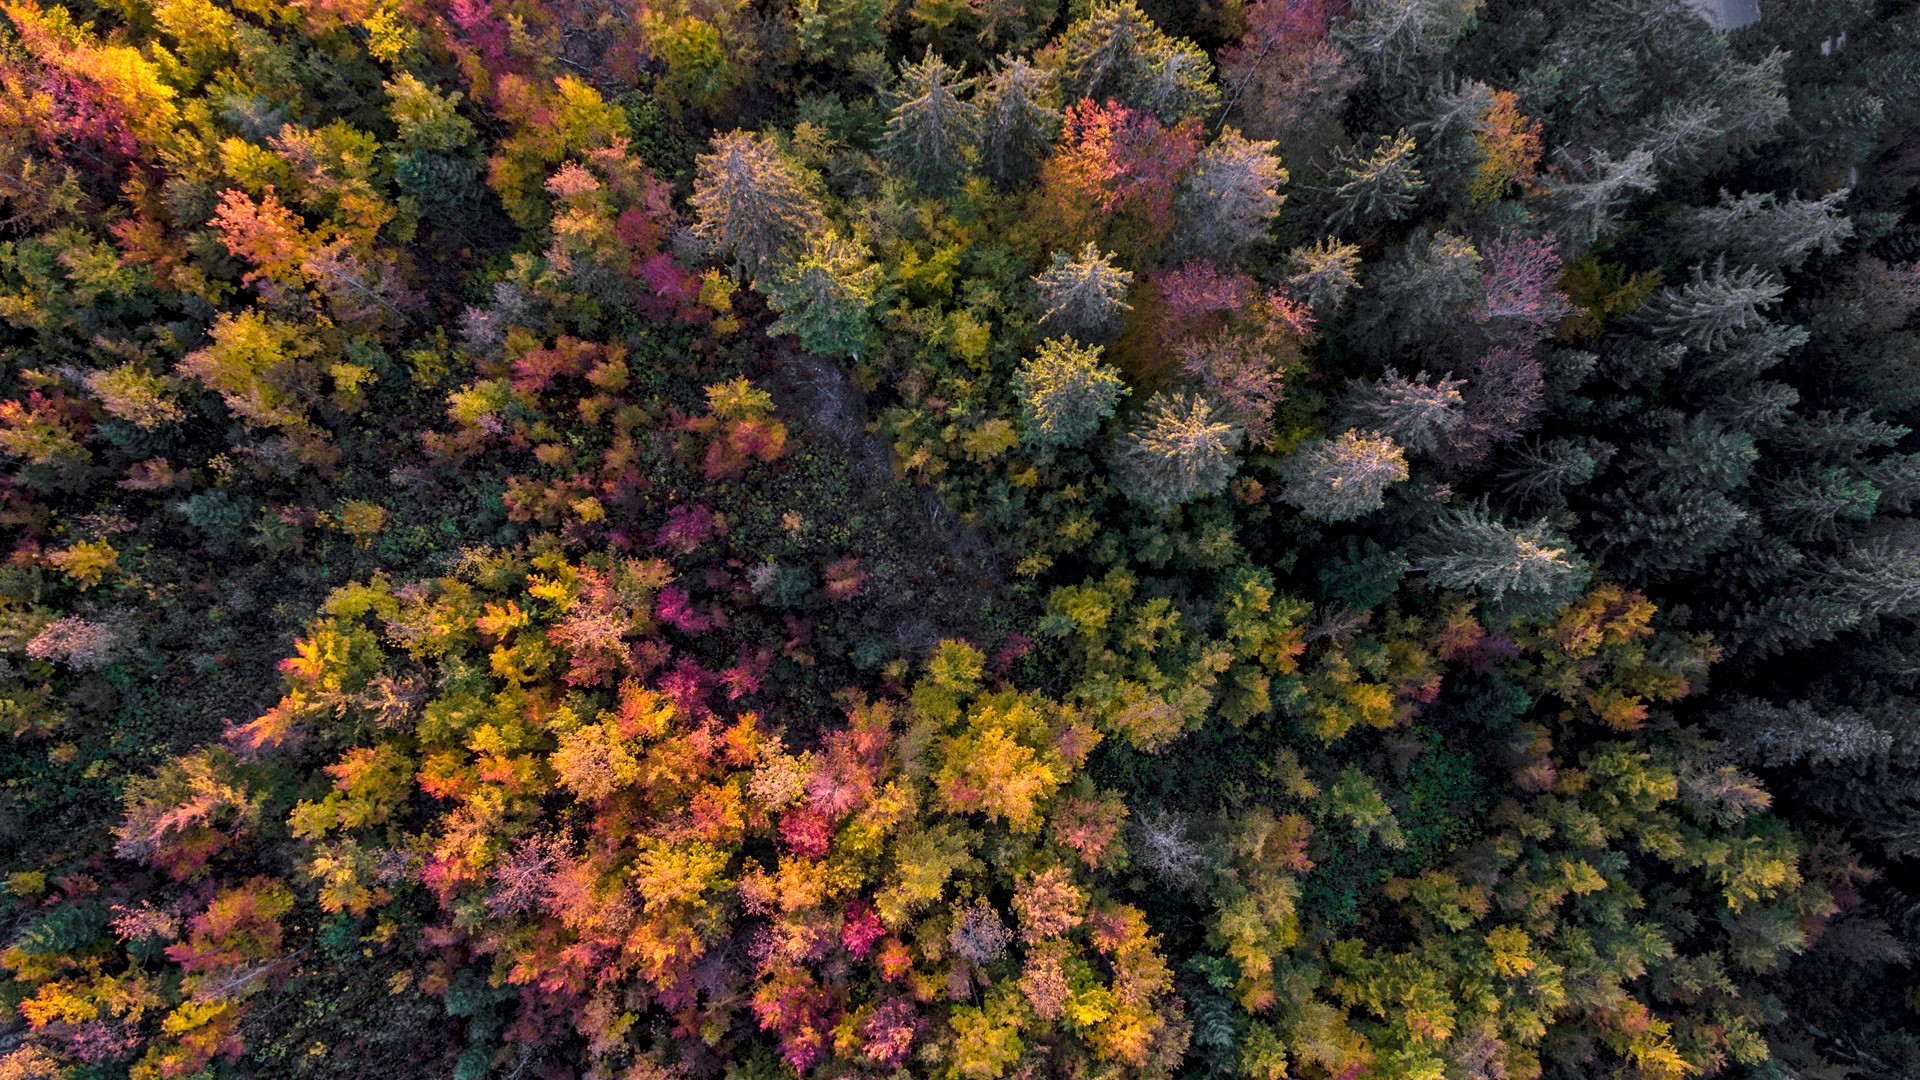 General 1920x1080 nature trees forest plants fall aerial view drone photo Switzerland